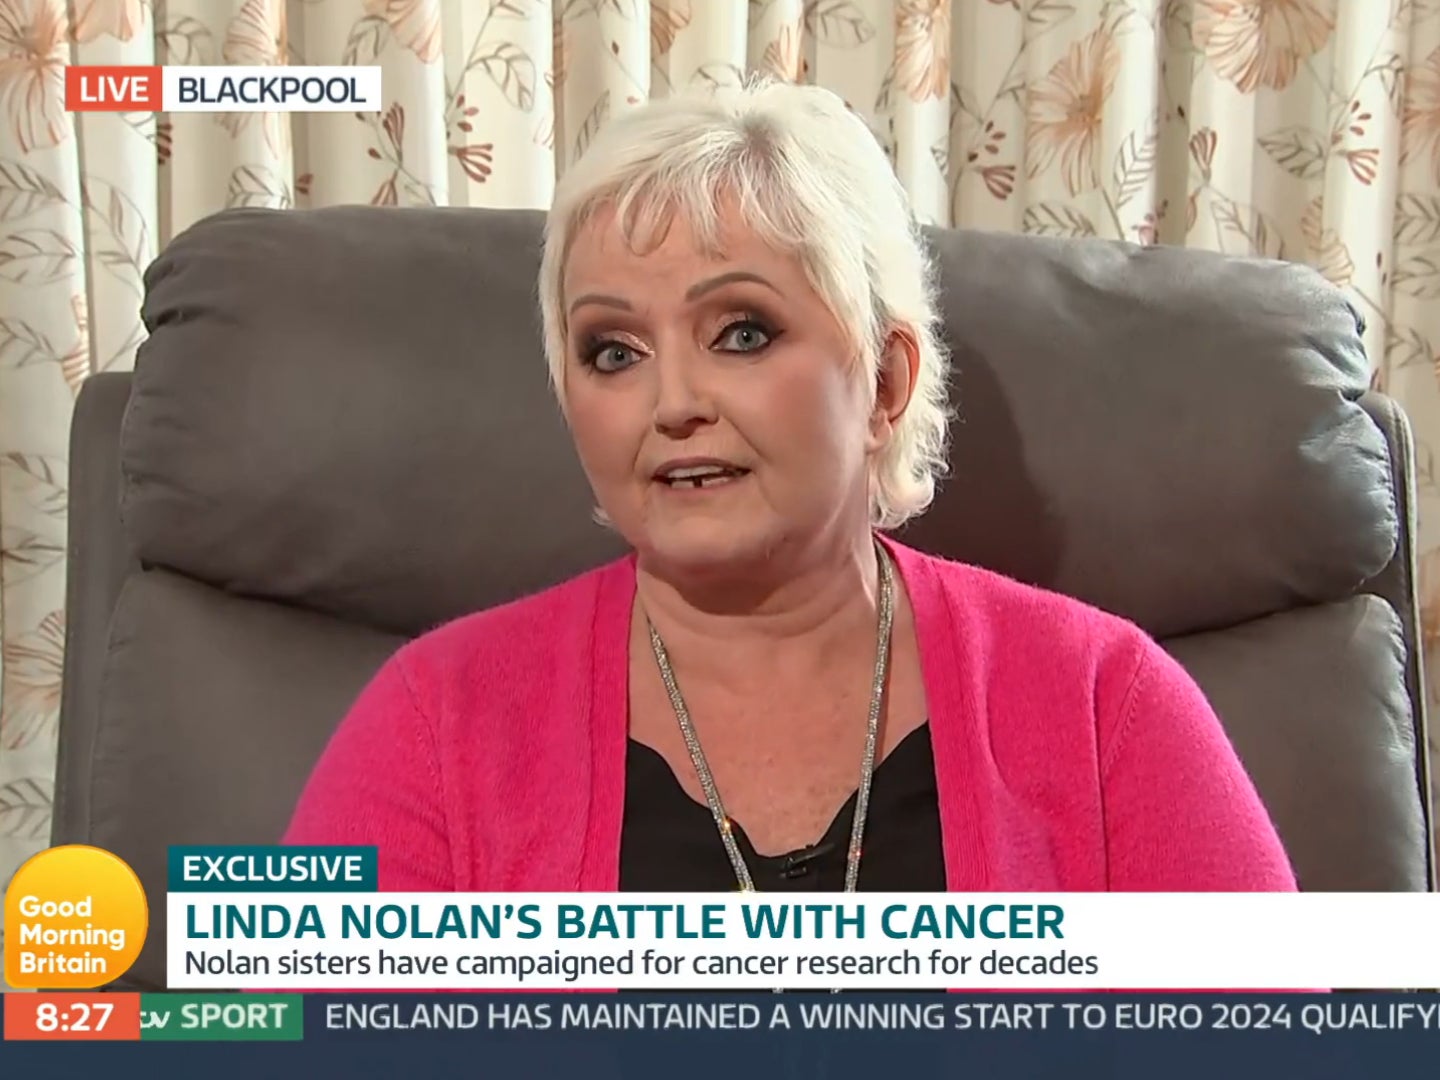 Linda Nolan shares a health update about her cancer, which has spread to her brain